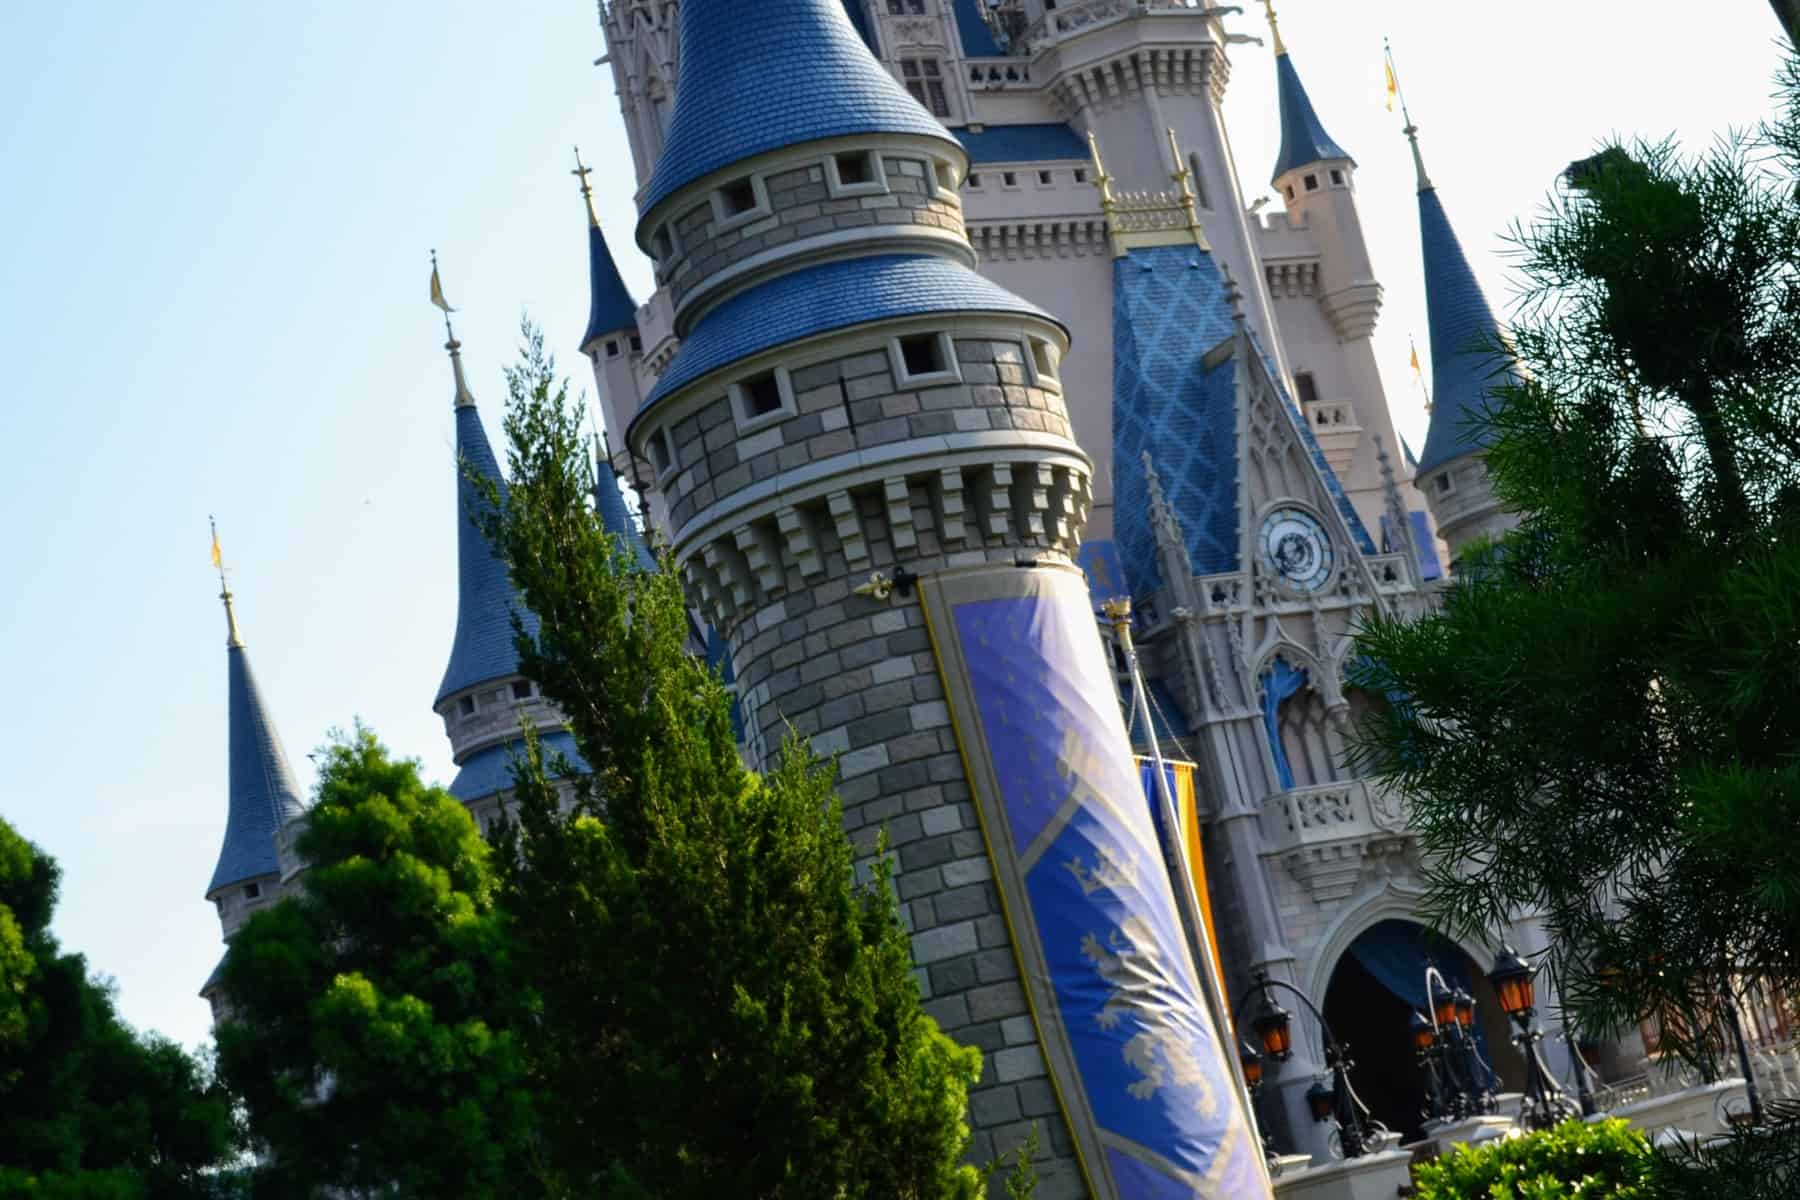 Can you bring food into Disney World?